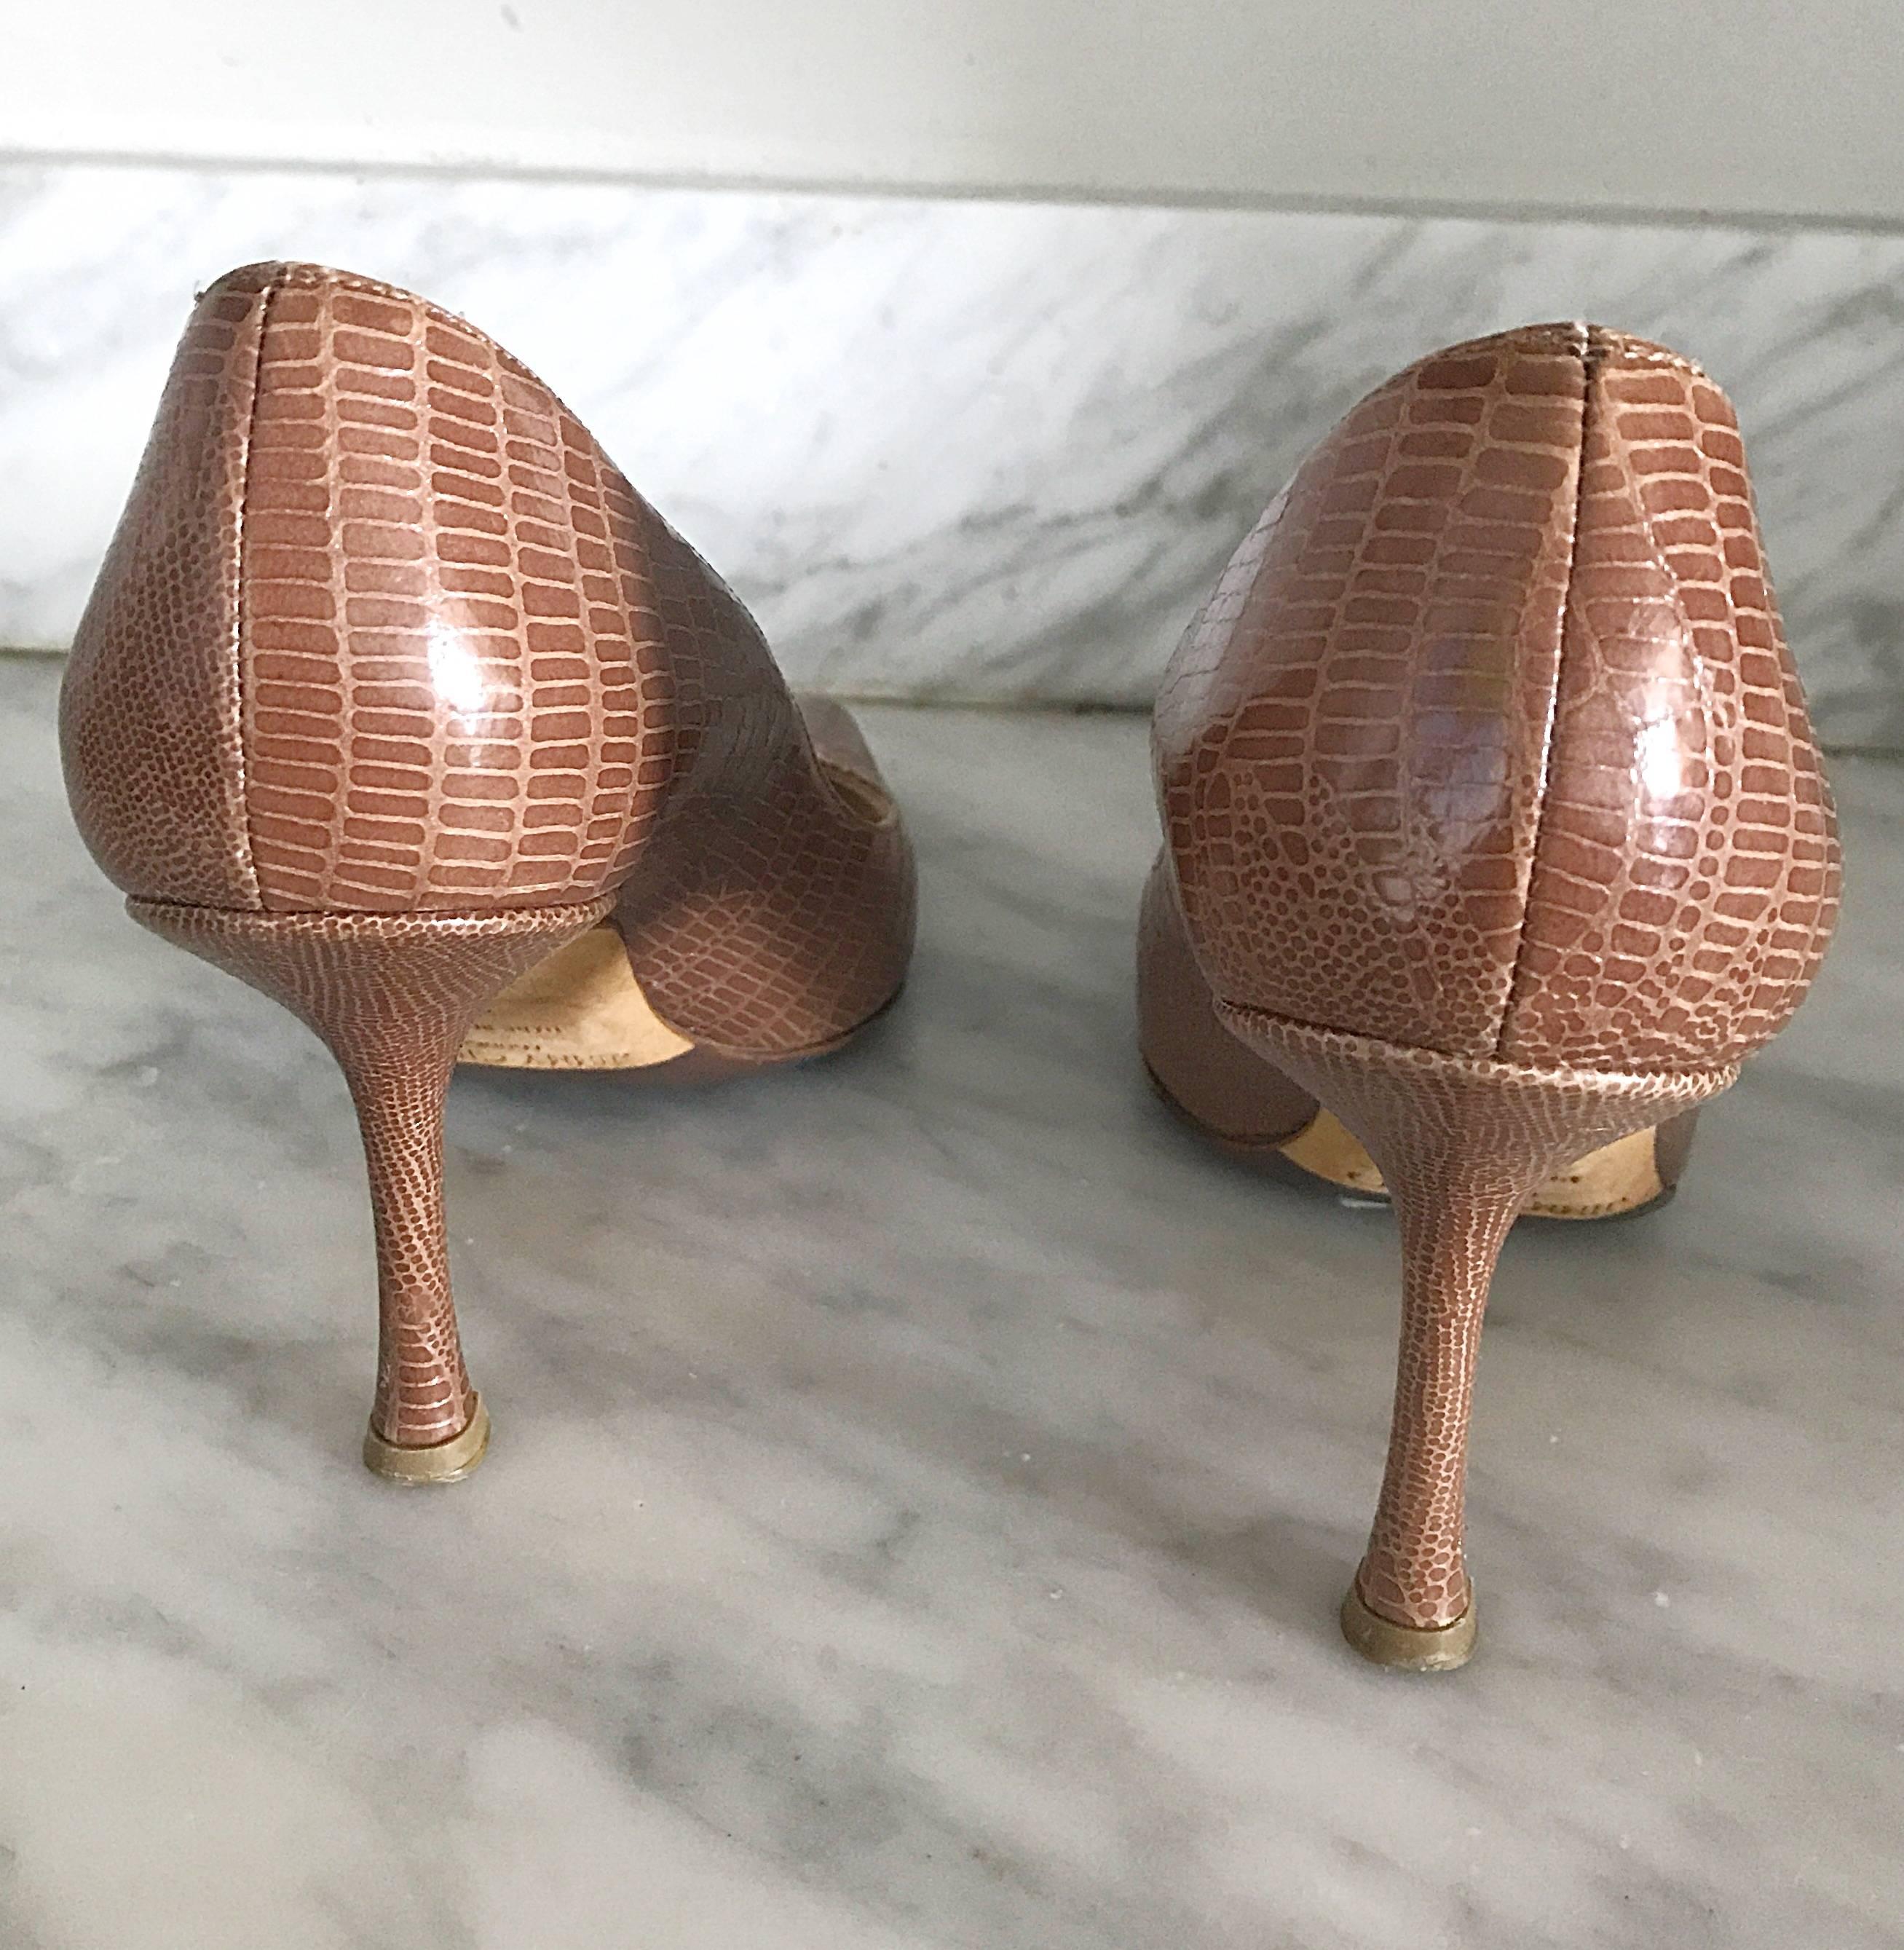 Jimmy Choo Size 36 6 Tan Nude Lizard Embossed Peek-a-Boo Stilettos Heels Shoes In Excellent Condition For Sale In San Diego, CA